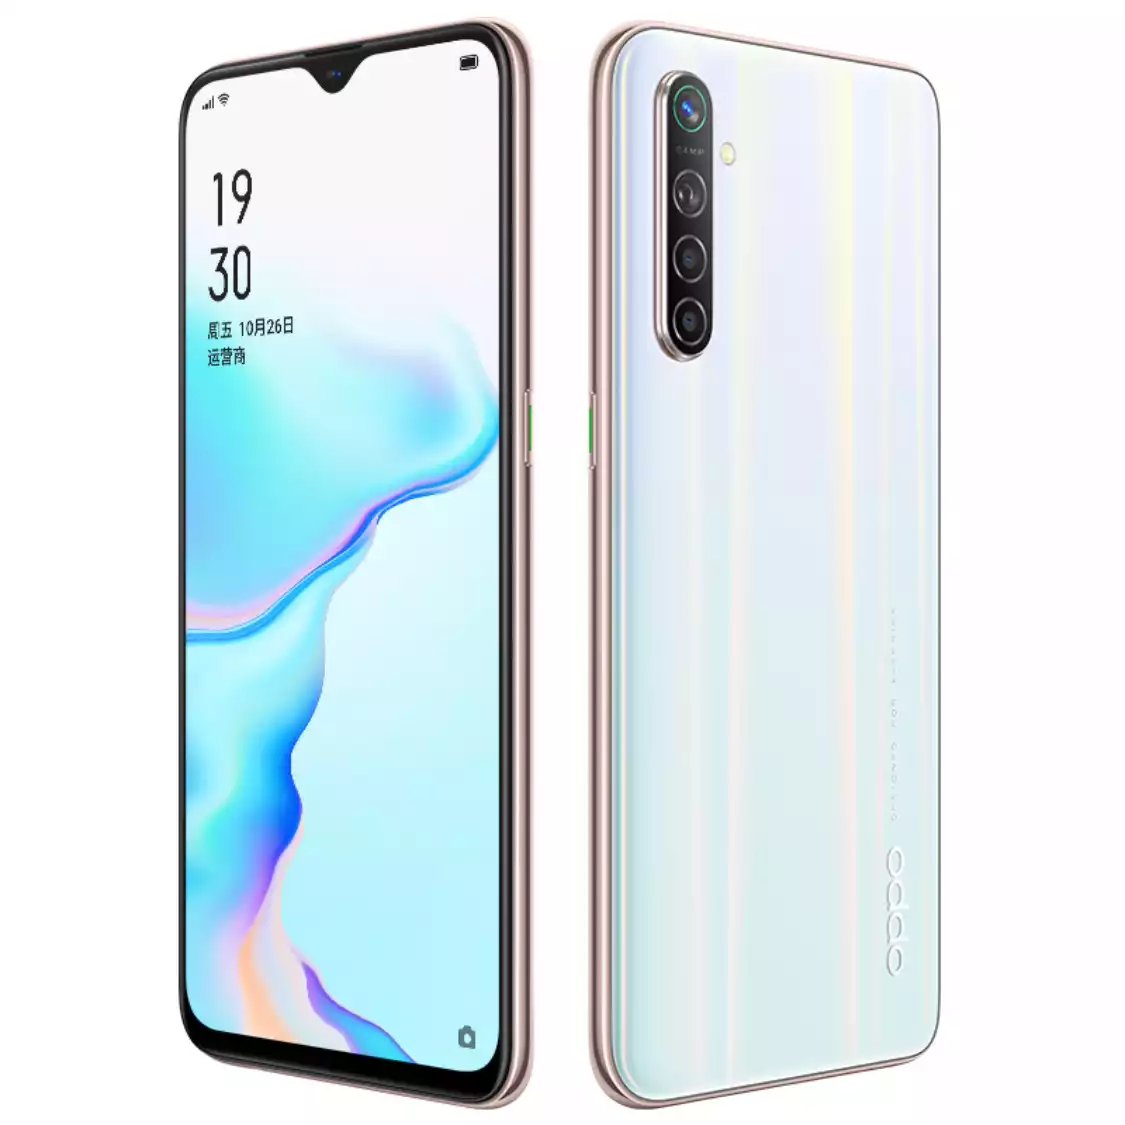 Oppo F19 Pro mobile specifications and price, and its most important